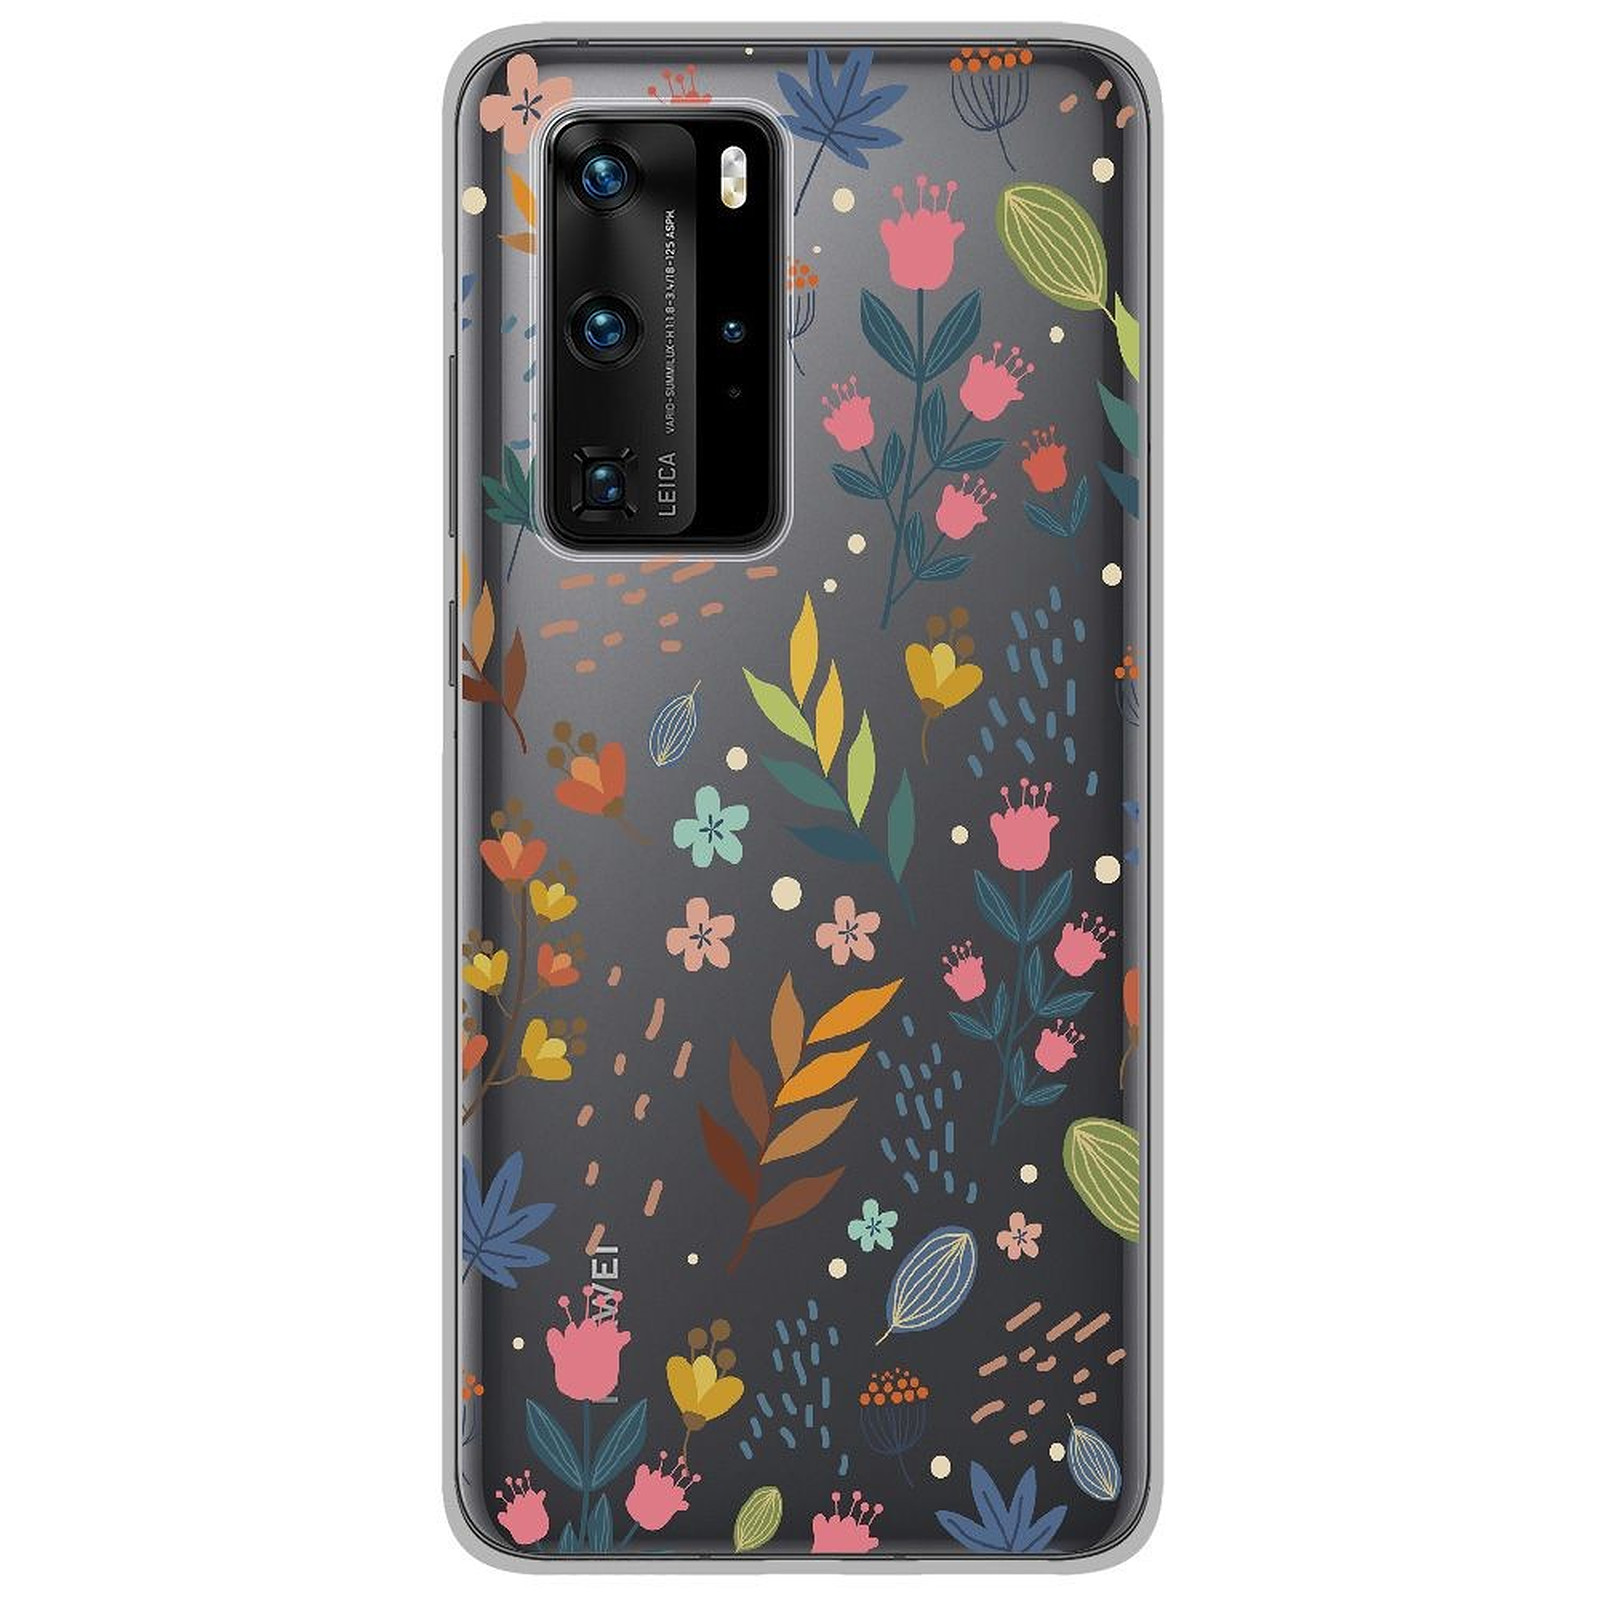 1001 Coques Coque silicone gel Huawei P40 Pro motif Fleurs colorees - Coque telephone 1001Coques